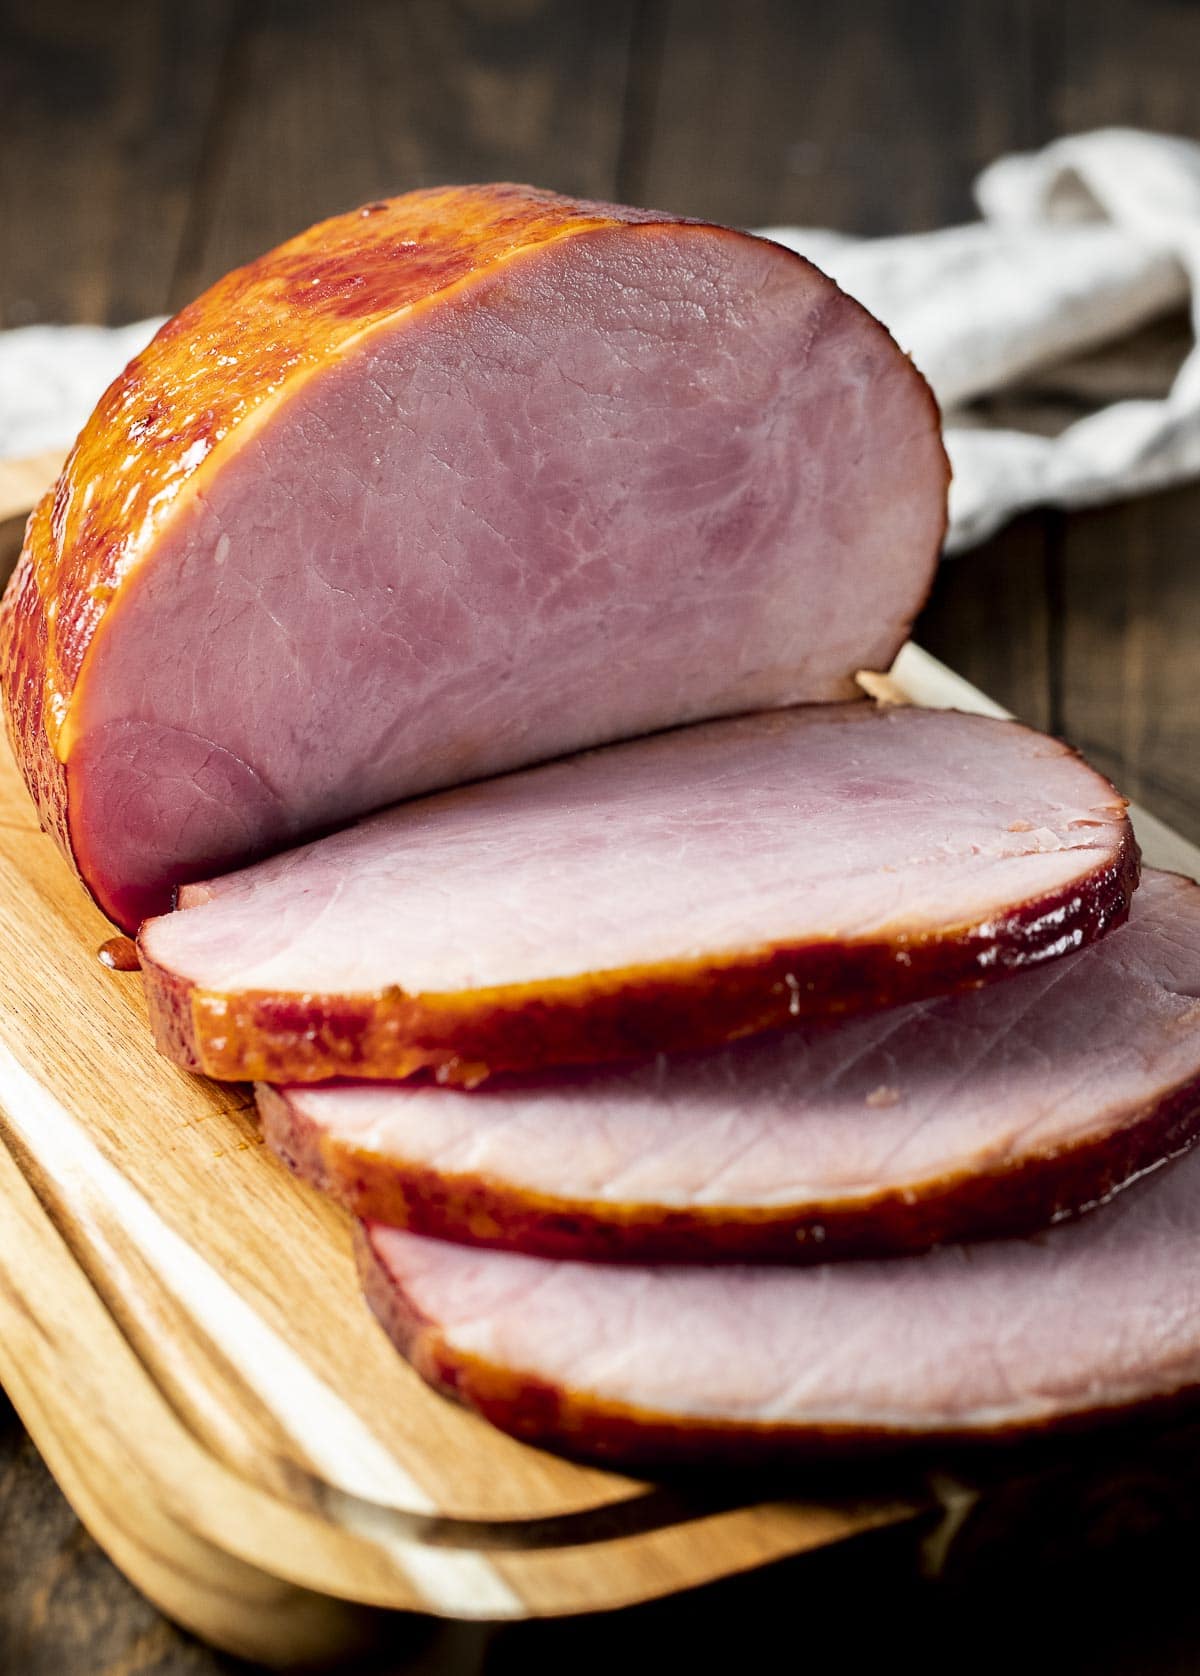 Side view of a boneless ham on a wooden board and cut into slices.